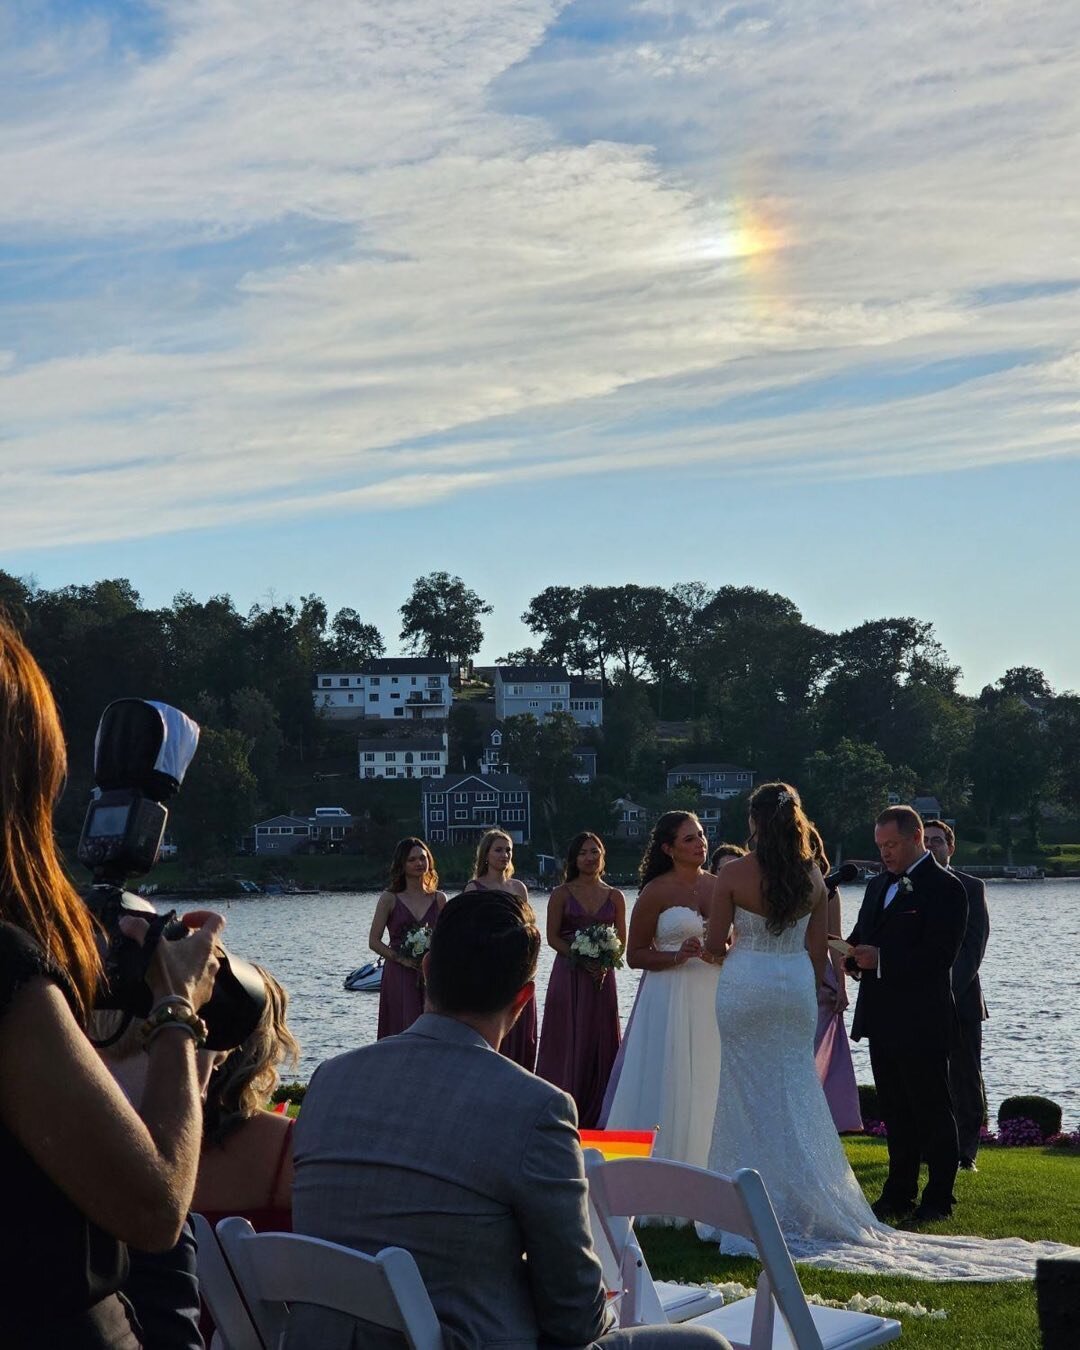 Somewhere Over the Rainbow was the processional for the bride and there was a rainbow🌈at Candlewood Lake#awesomemusic #weddingmusic #herecomesthebride #brides #candlewoodlake #gig #ceremonymusic #somewhereovertherainbow #weddingvenue